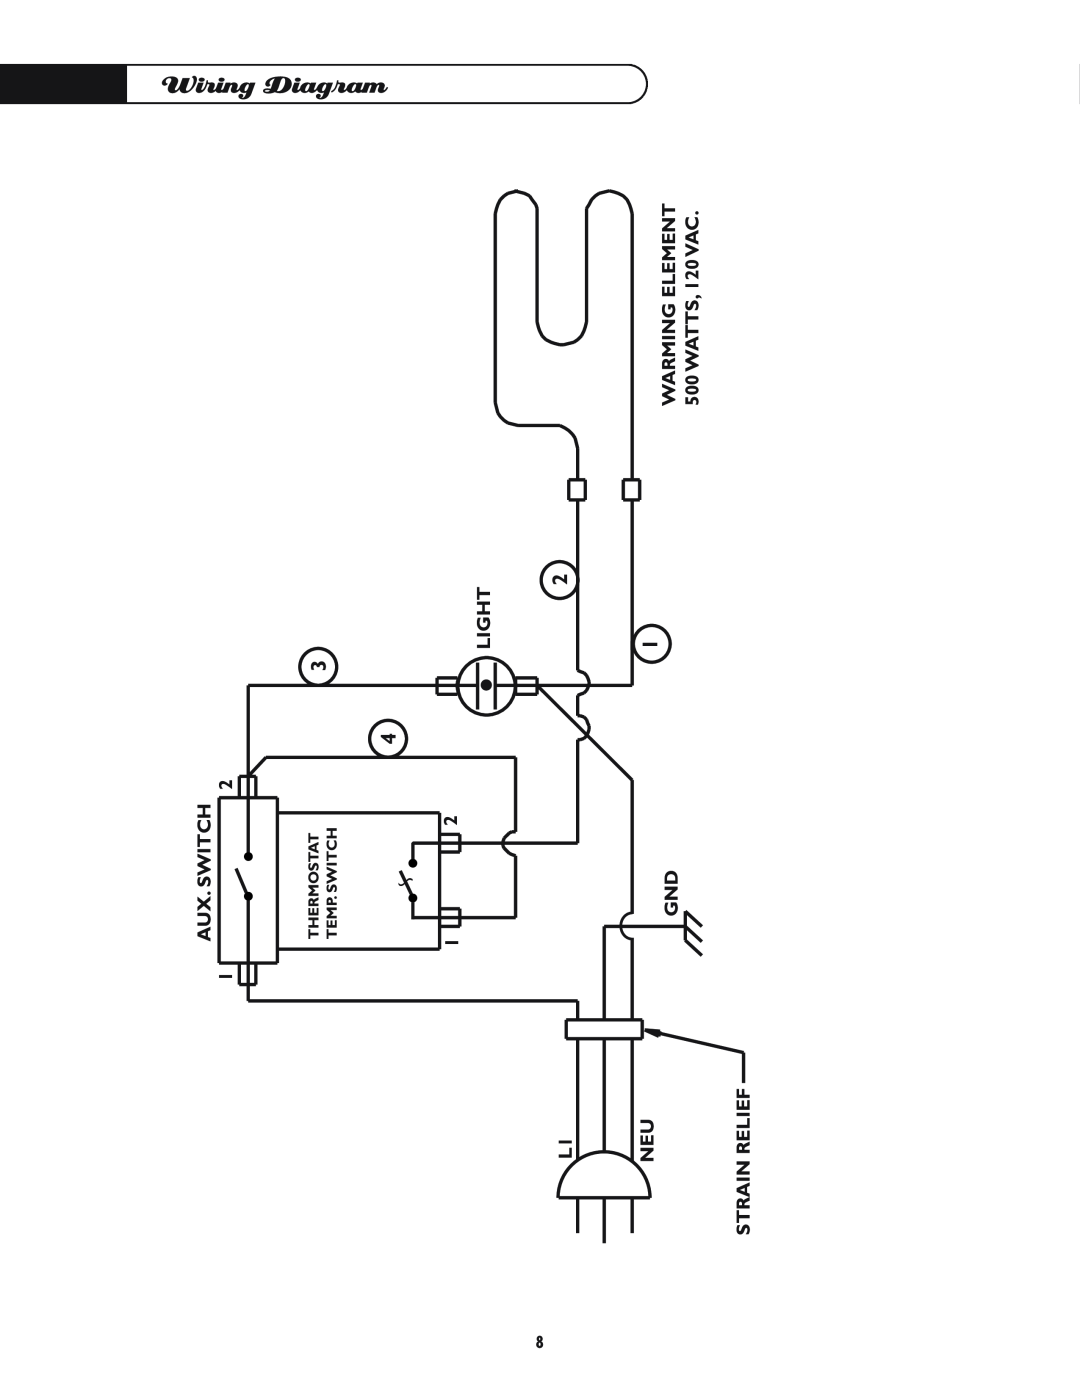 DCS WD-30-BL manual Wiring Diagram, Aux. Switch, Light, Gnd Strain Relief, WARMING ELEMENT 500 WATTS, 120 VAC 